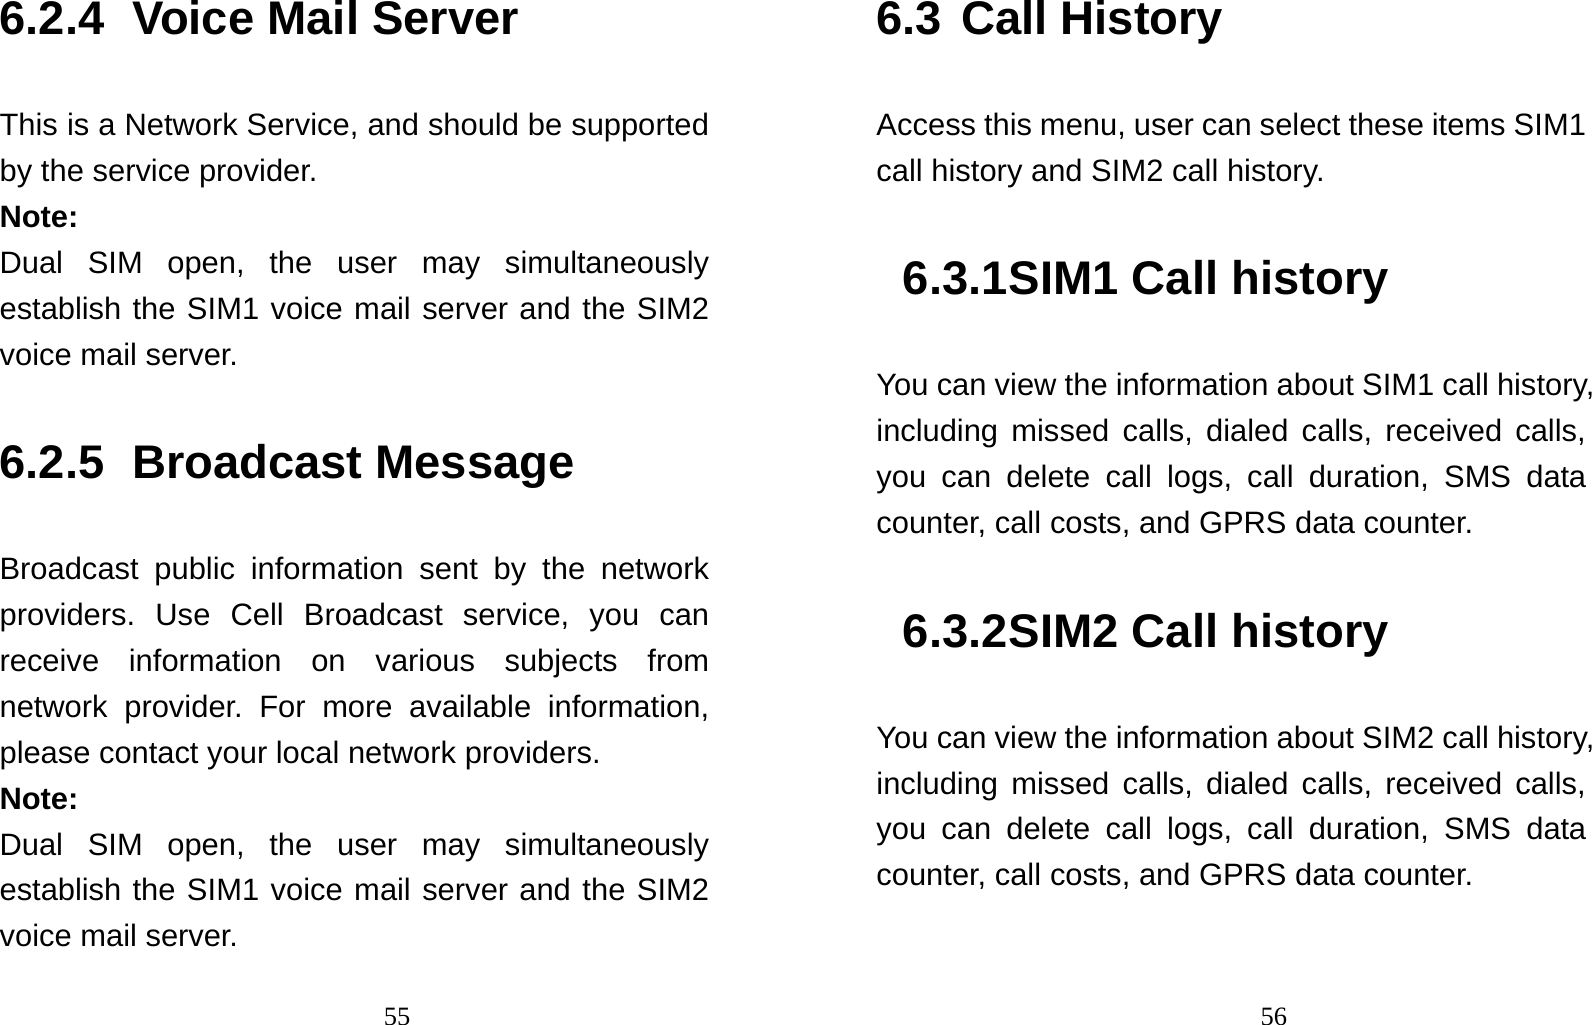                                556.2.4 Voice Mail Server This is a Network Service, and should be supported by the service provider. Note: Dual SIM open, the user may simultaneously establish the SIM1 voice mail server and the SIM2 voice mail server. 6.2.5 Broadcast Message Broadcast public information sent by the network providers. Use Cell Broadcast service, you can receive information on various subjects from network provider. For more available information, please contact your local network providers. Note: Dual SIM open, the user may simultaneously establish the SIM1 voice mail server and the SIM2 voice mail server.                                566.3 Call History Access this menu, user can select these items SIM1 call history and SIM2 call history. 6.3.1 SIM1 Call history You can view the information about SIM1 call history, including missed calls, dialed calls, received calls, you can delete call logs, call duration, SMS data counter, call costs, and GPRS data counter. 6.3.2 SIM2 Call history You can view the information about SIM2 call history, including missed calls, dialed calls, received calls, you can delete call logs, call duration, SMS data counter, call costs, and GPRS data counter. 